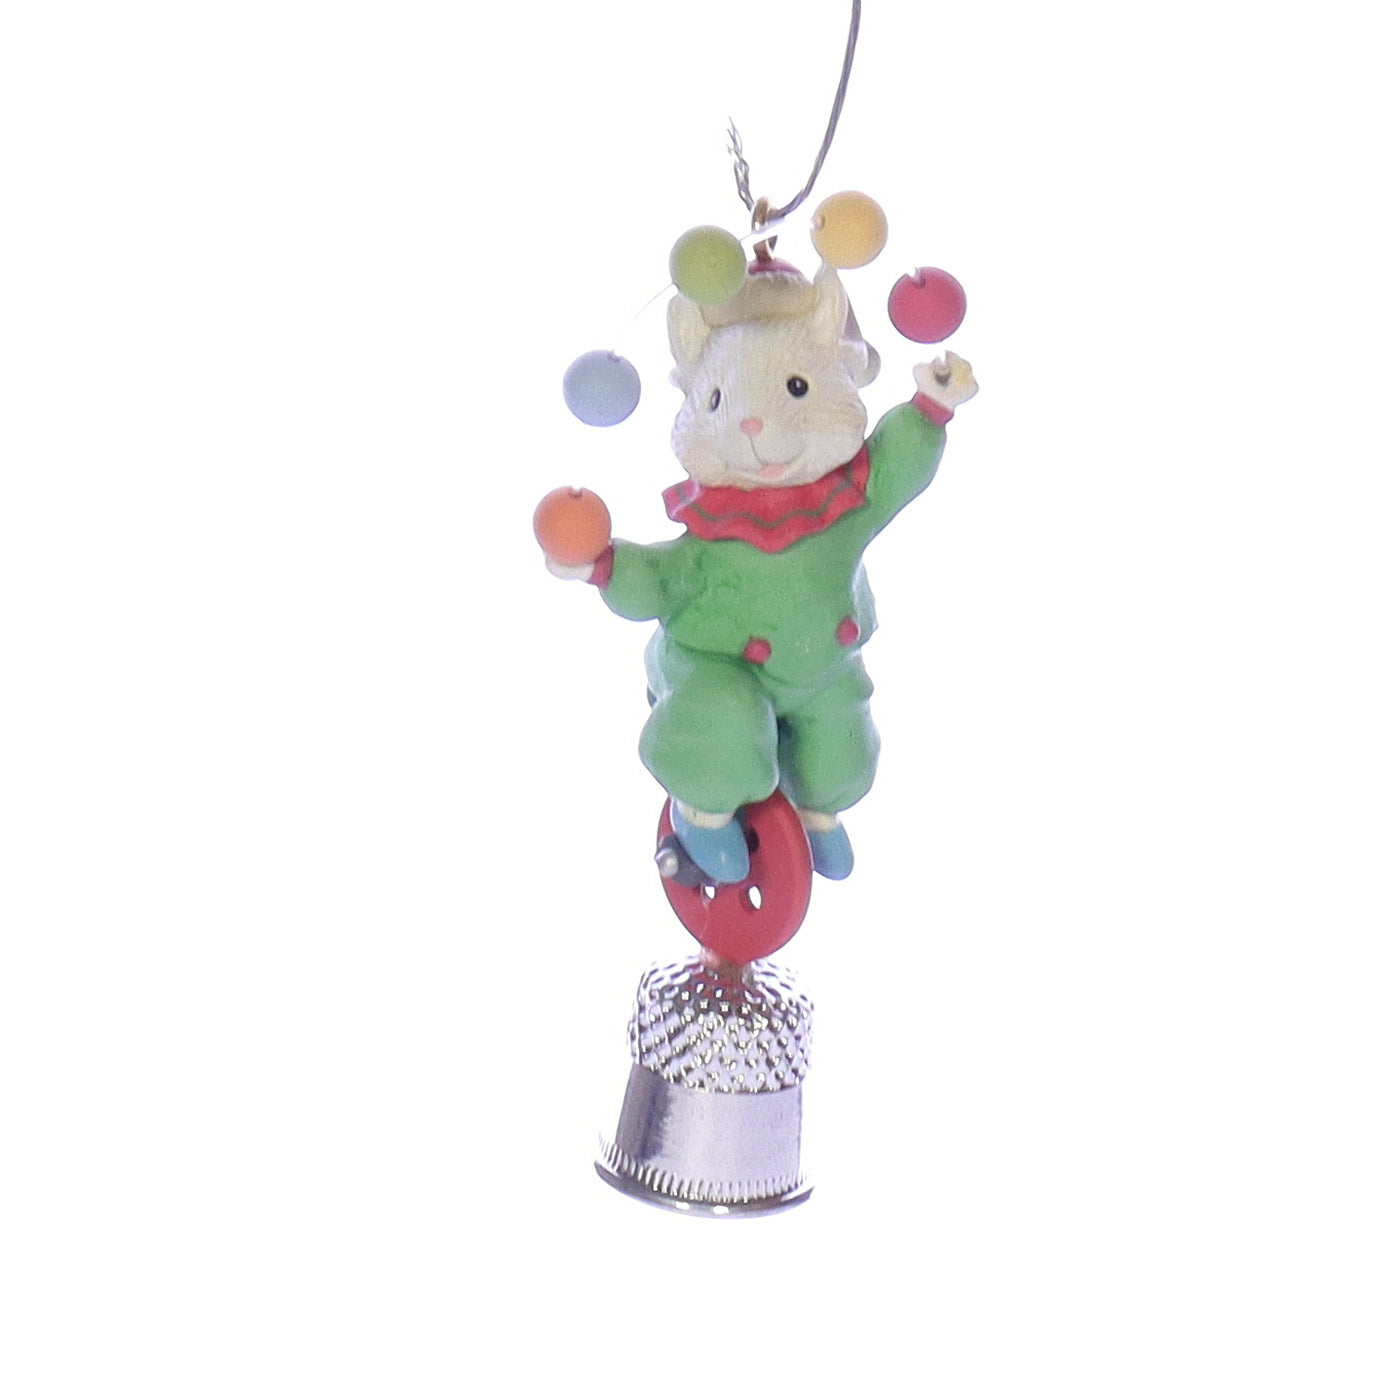 Enesco_Treasury_of_Christmas_Ornaments_597028_Jugglin_the_Holidays_Mouse_Ornament_1992 Front View